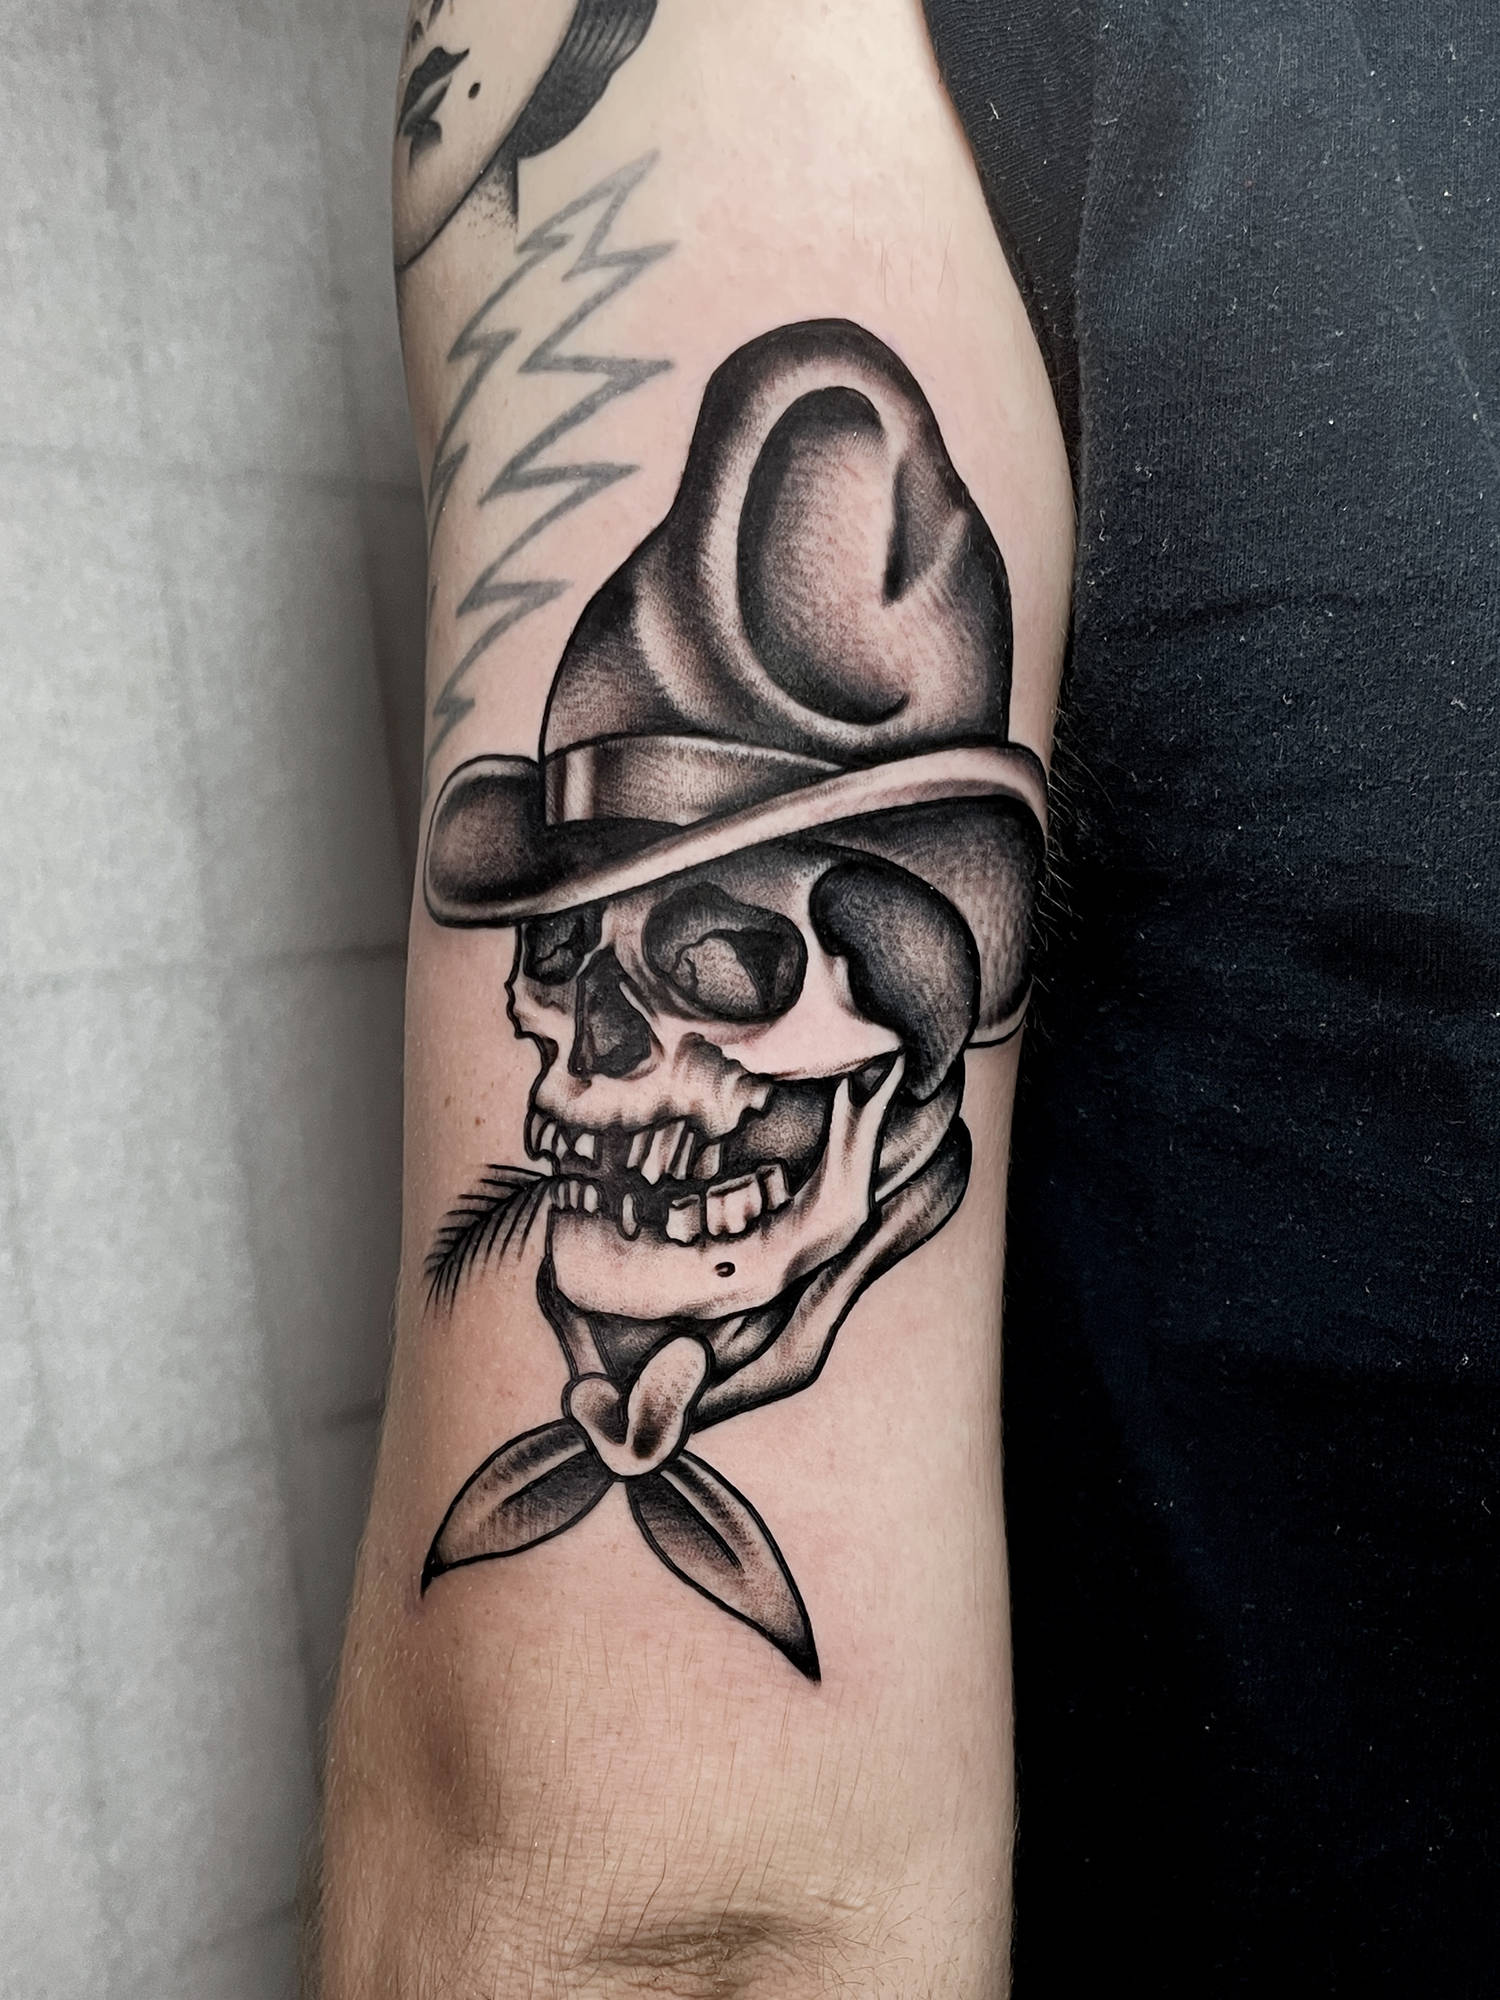 A cowboy skull tattoo may represent strength, bravery, and grit 